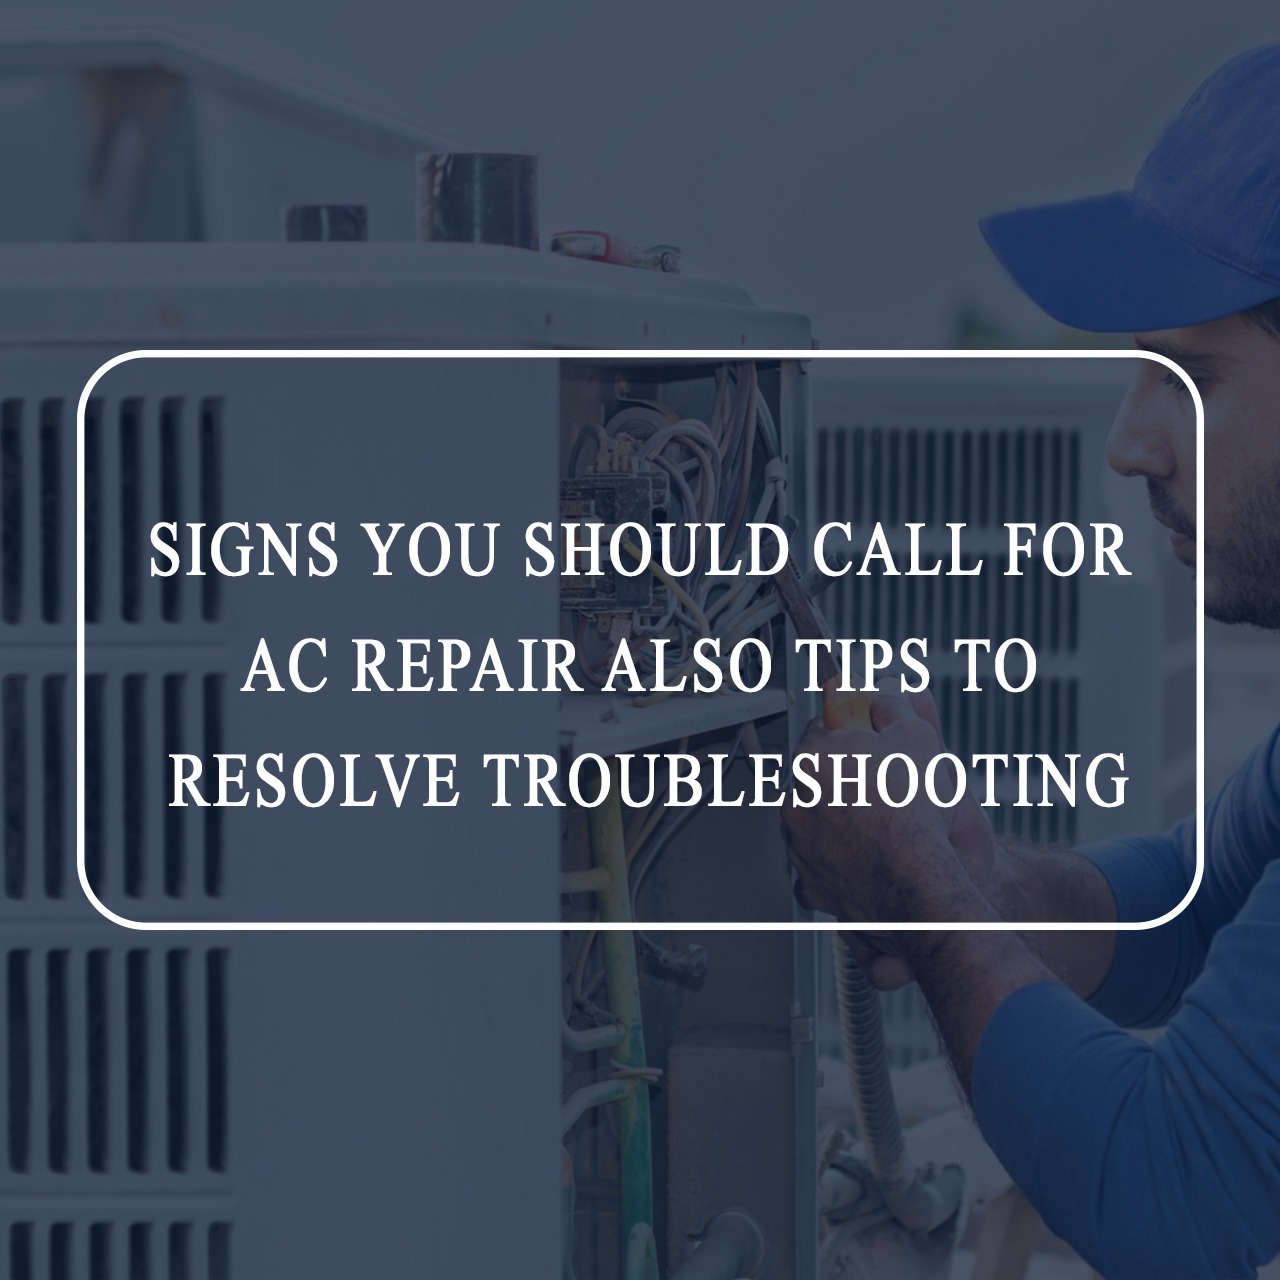 Signs You Should Call for AC Repair Also Tips to Resolve Troubleshooting - Nature Cool